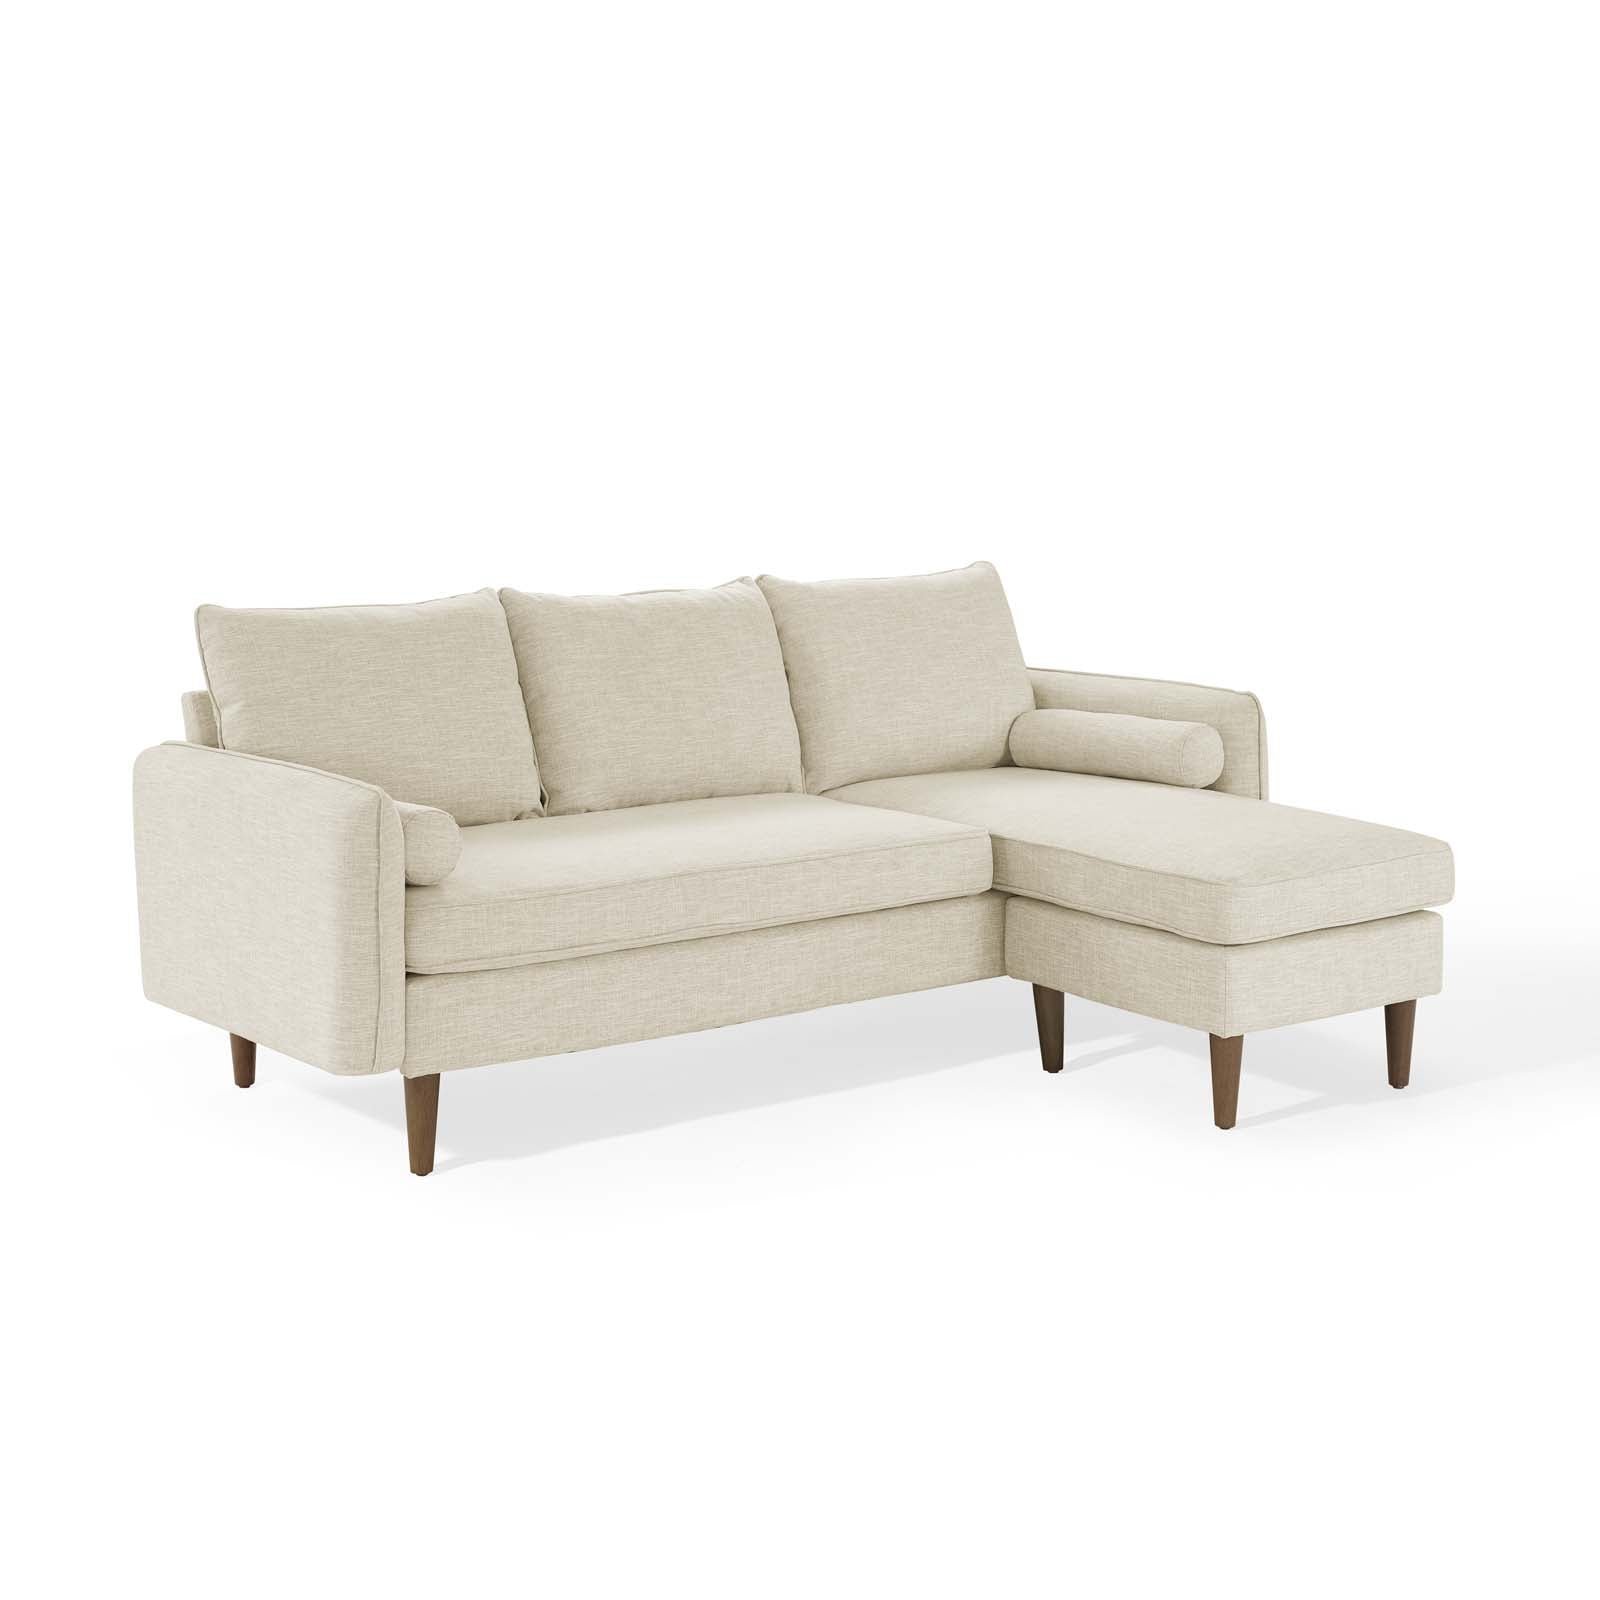 Modway Sectional Sofas - Revive Reversible Sectional Sofa Beige